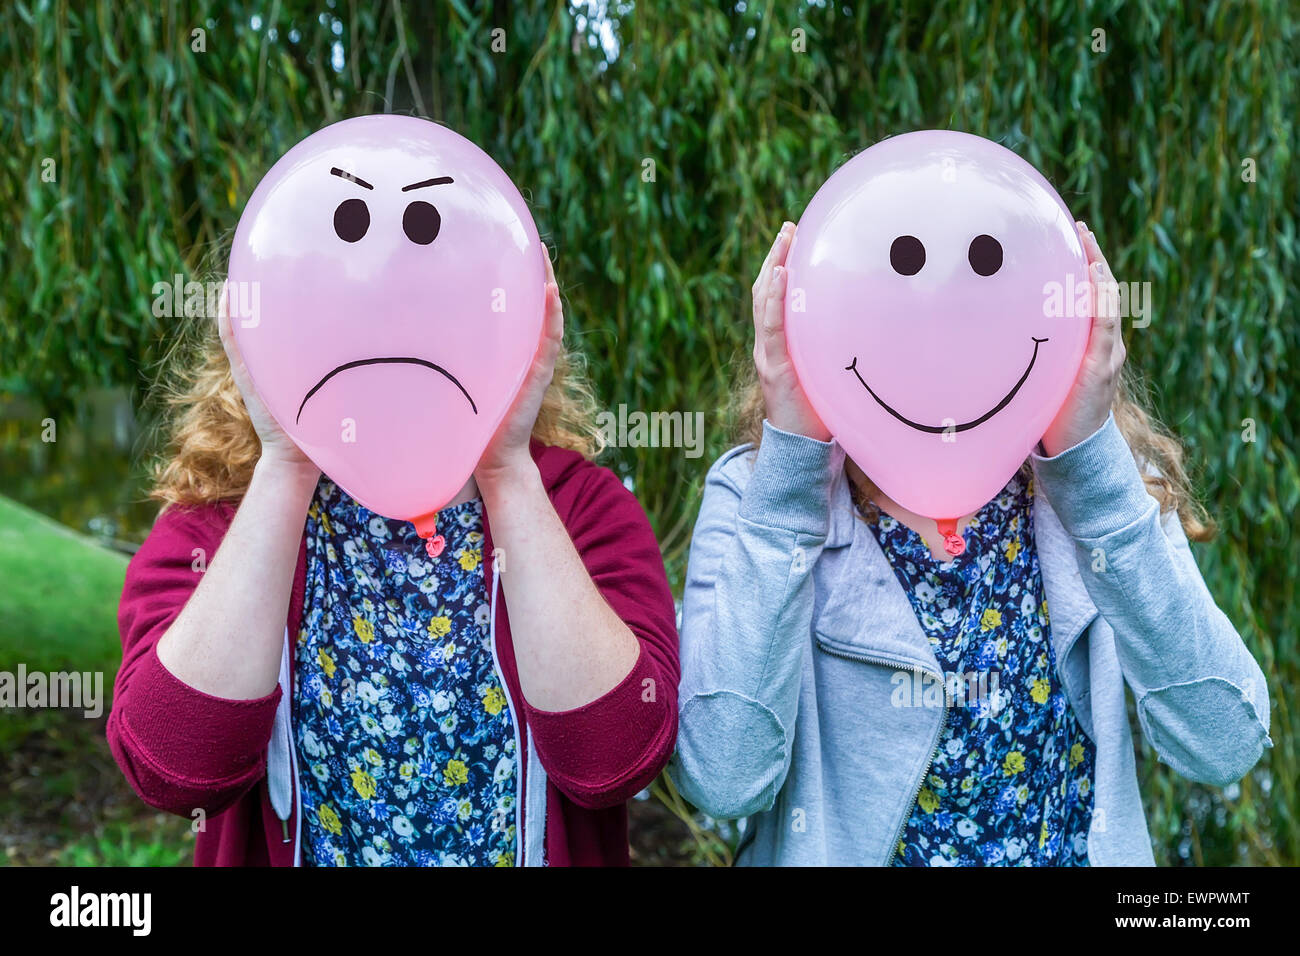 Two teenage girls holding balloons with smiling and angry facial expressions outdoors Stock Photo